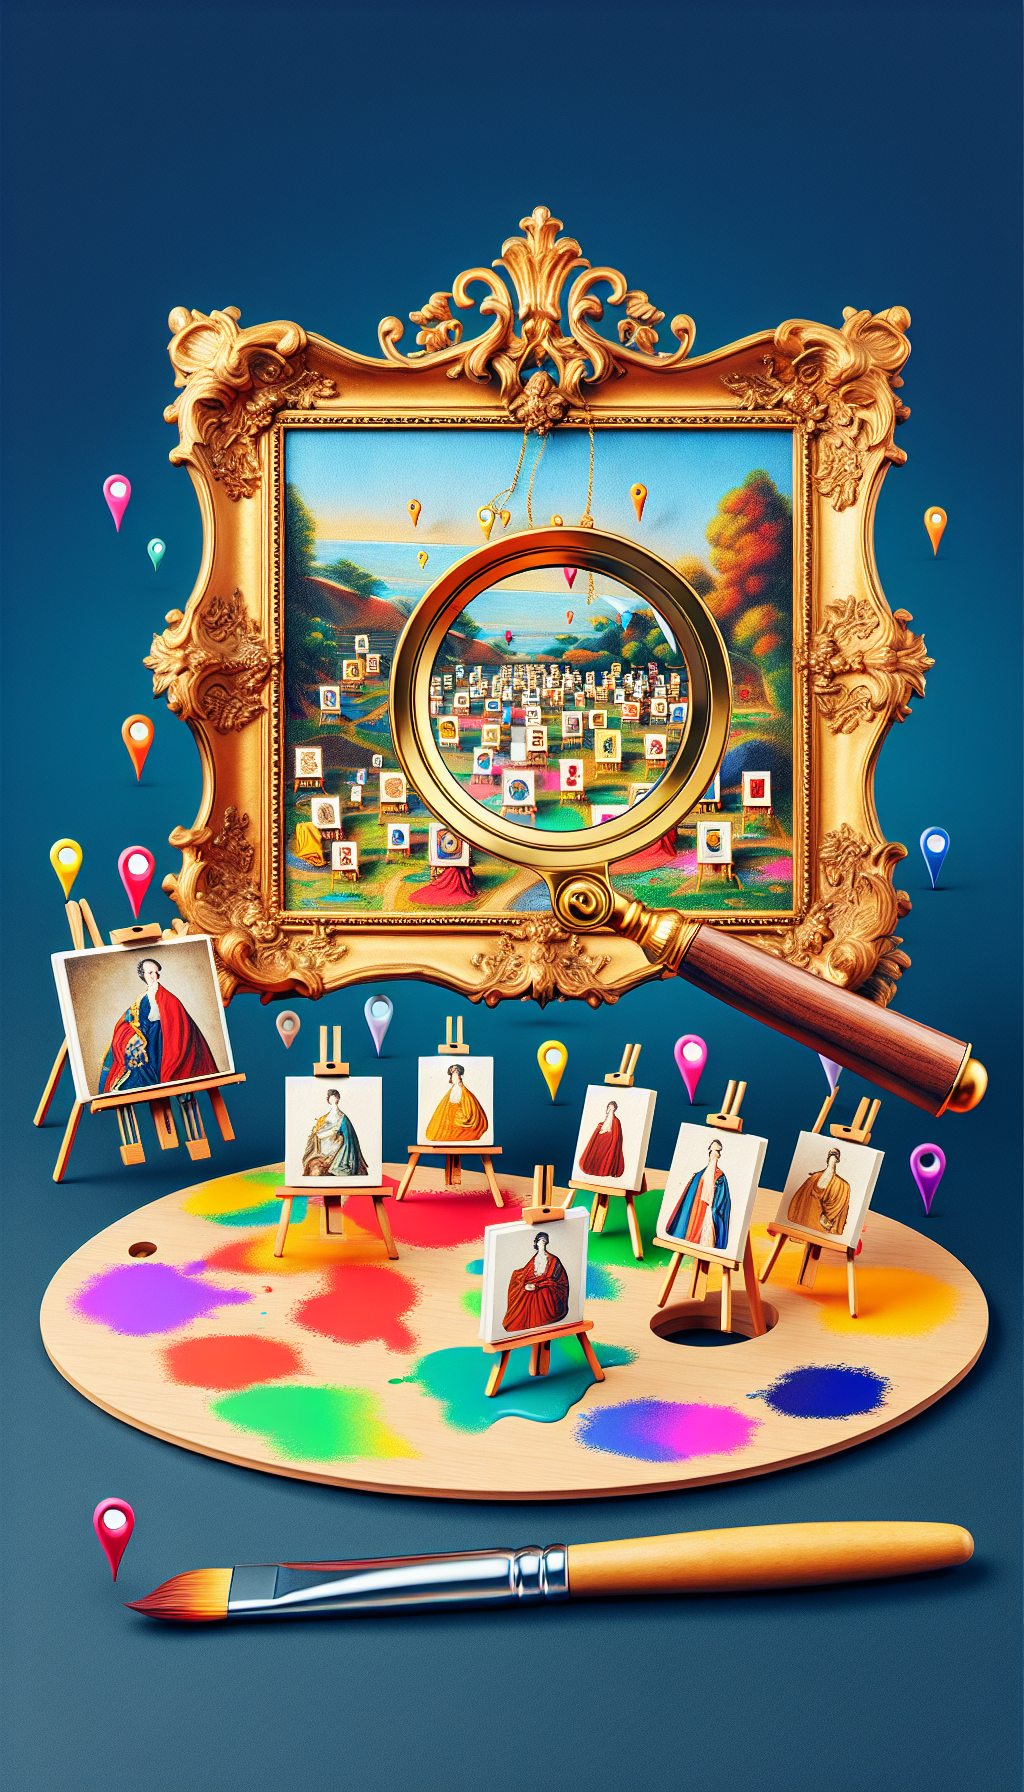 A whimsical magnifying glass framed by a gilded rococo-style frame peeks over a colorful map dotted with miniature easels representing appraisers. Each easel showcases a different classic artwork, hinting at diversity in expertise. Above, a painter's palette hovers, its paint splotches morphing into location pins, subtly echoing the theme of 'fine art appraisal near me.'